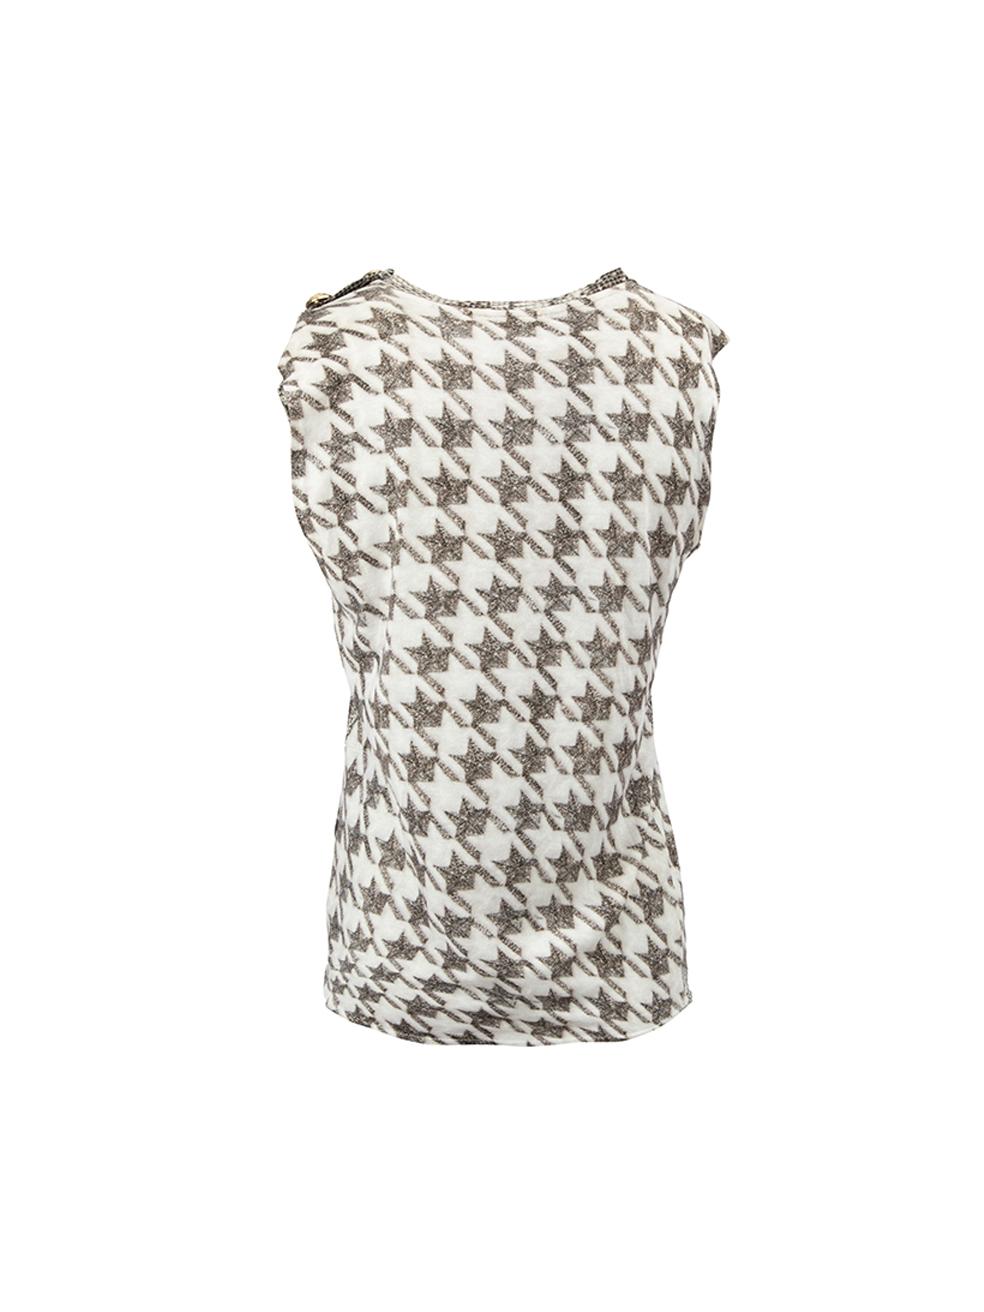 Balmain Women's Grey Houndstooth & Jewel Print Top In Good Condition For Sale In London, GB